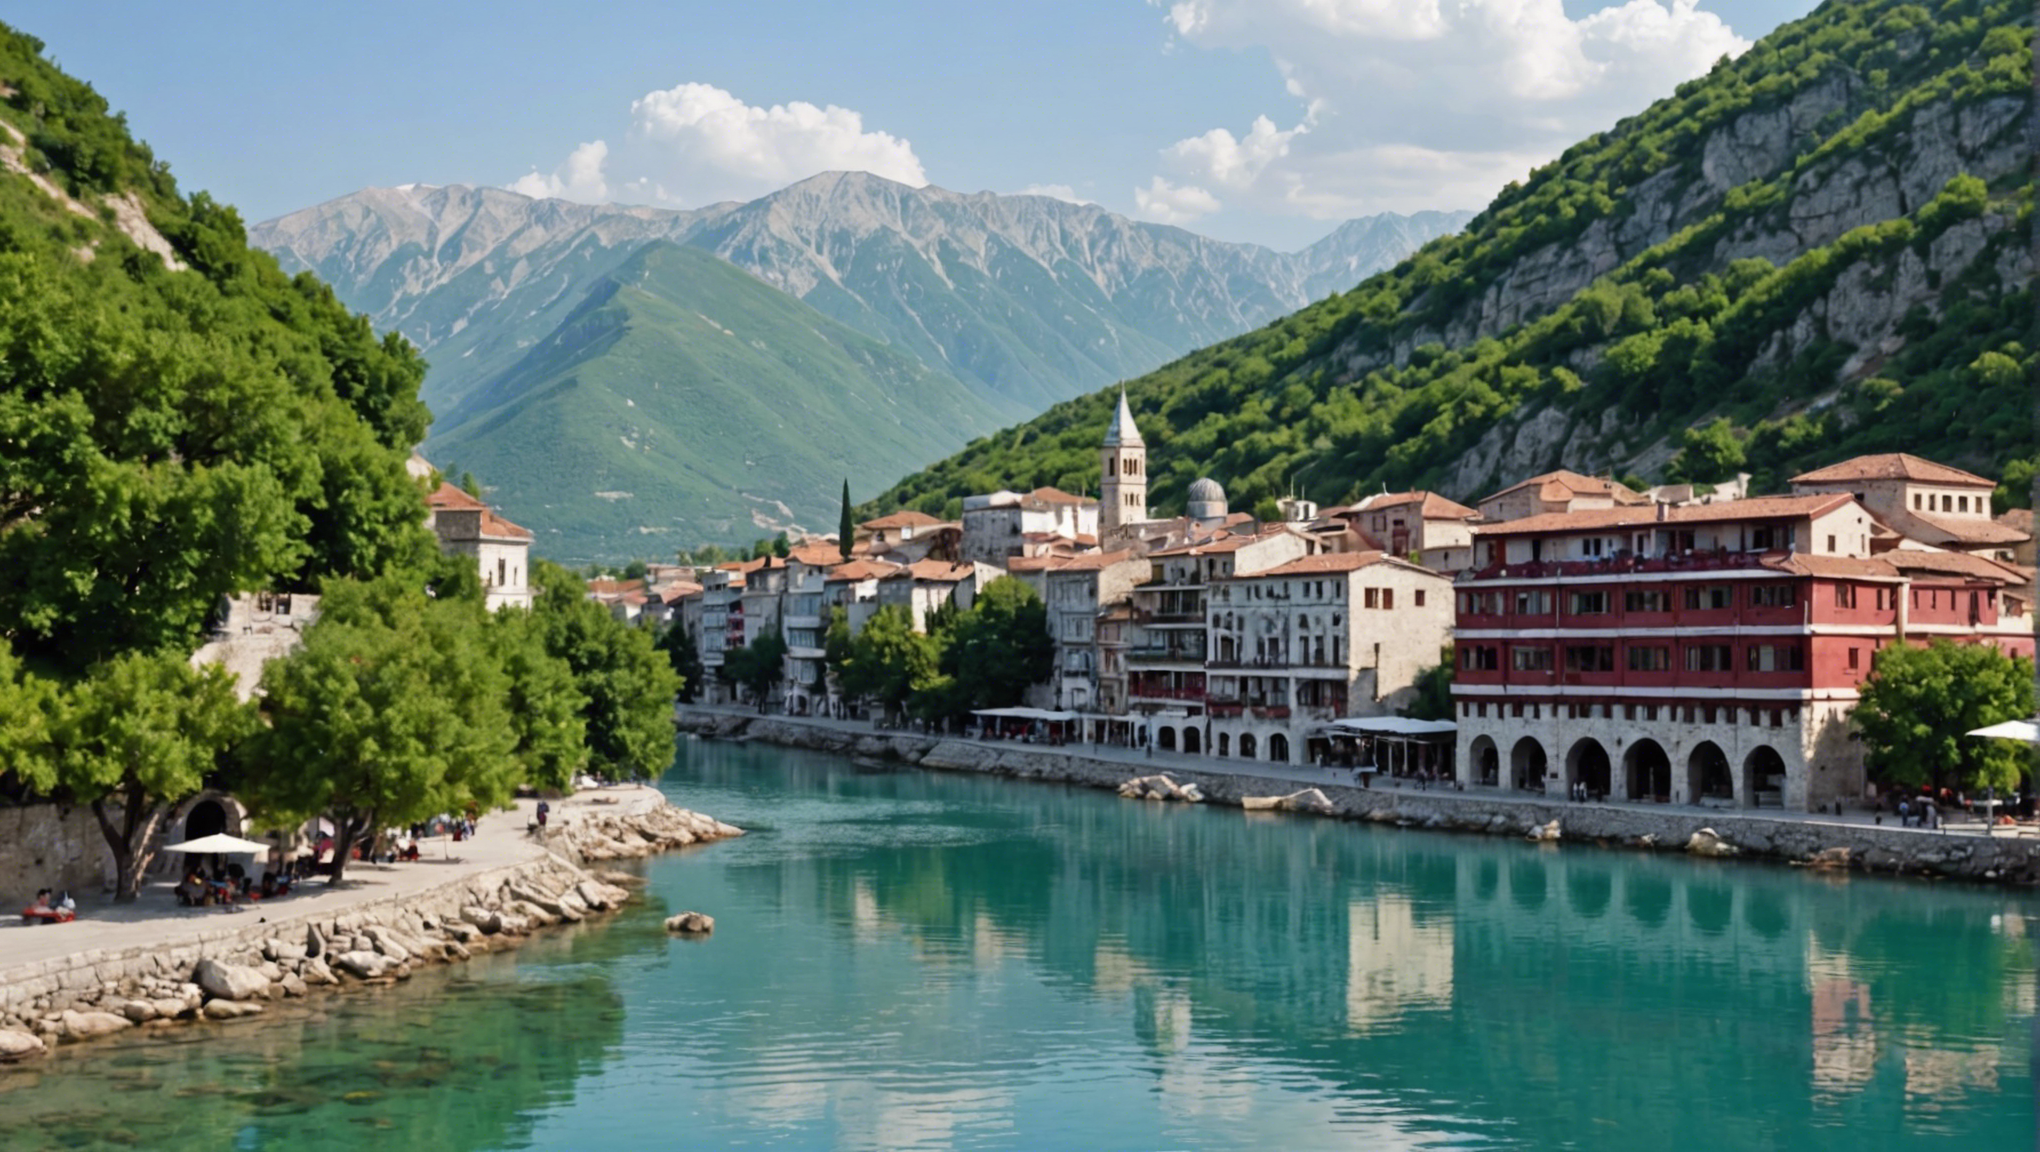 discover albania's must-sees and enjoy the must-do activities for a successful tourist trip to this magnificent country.